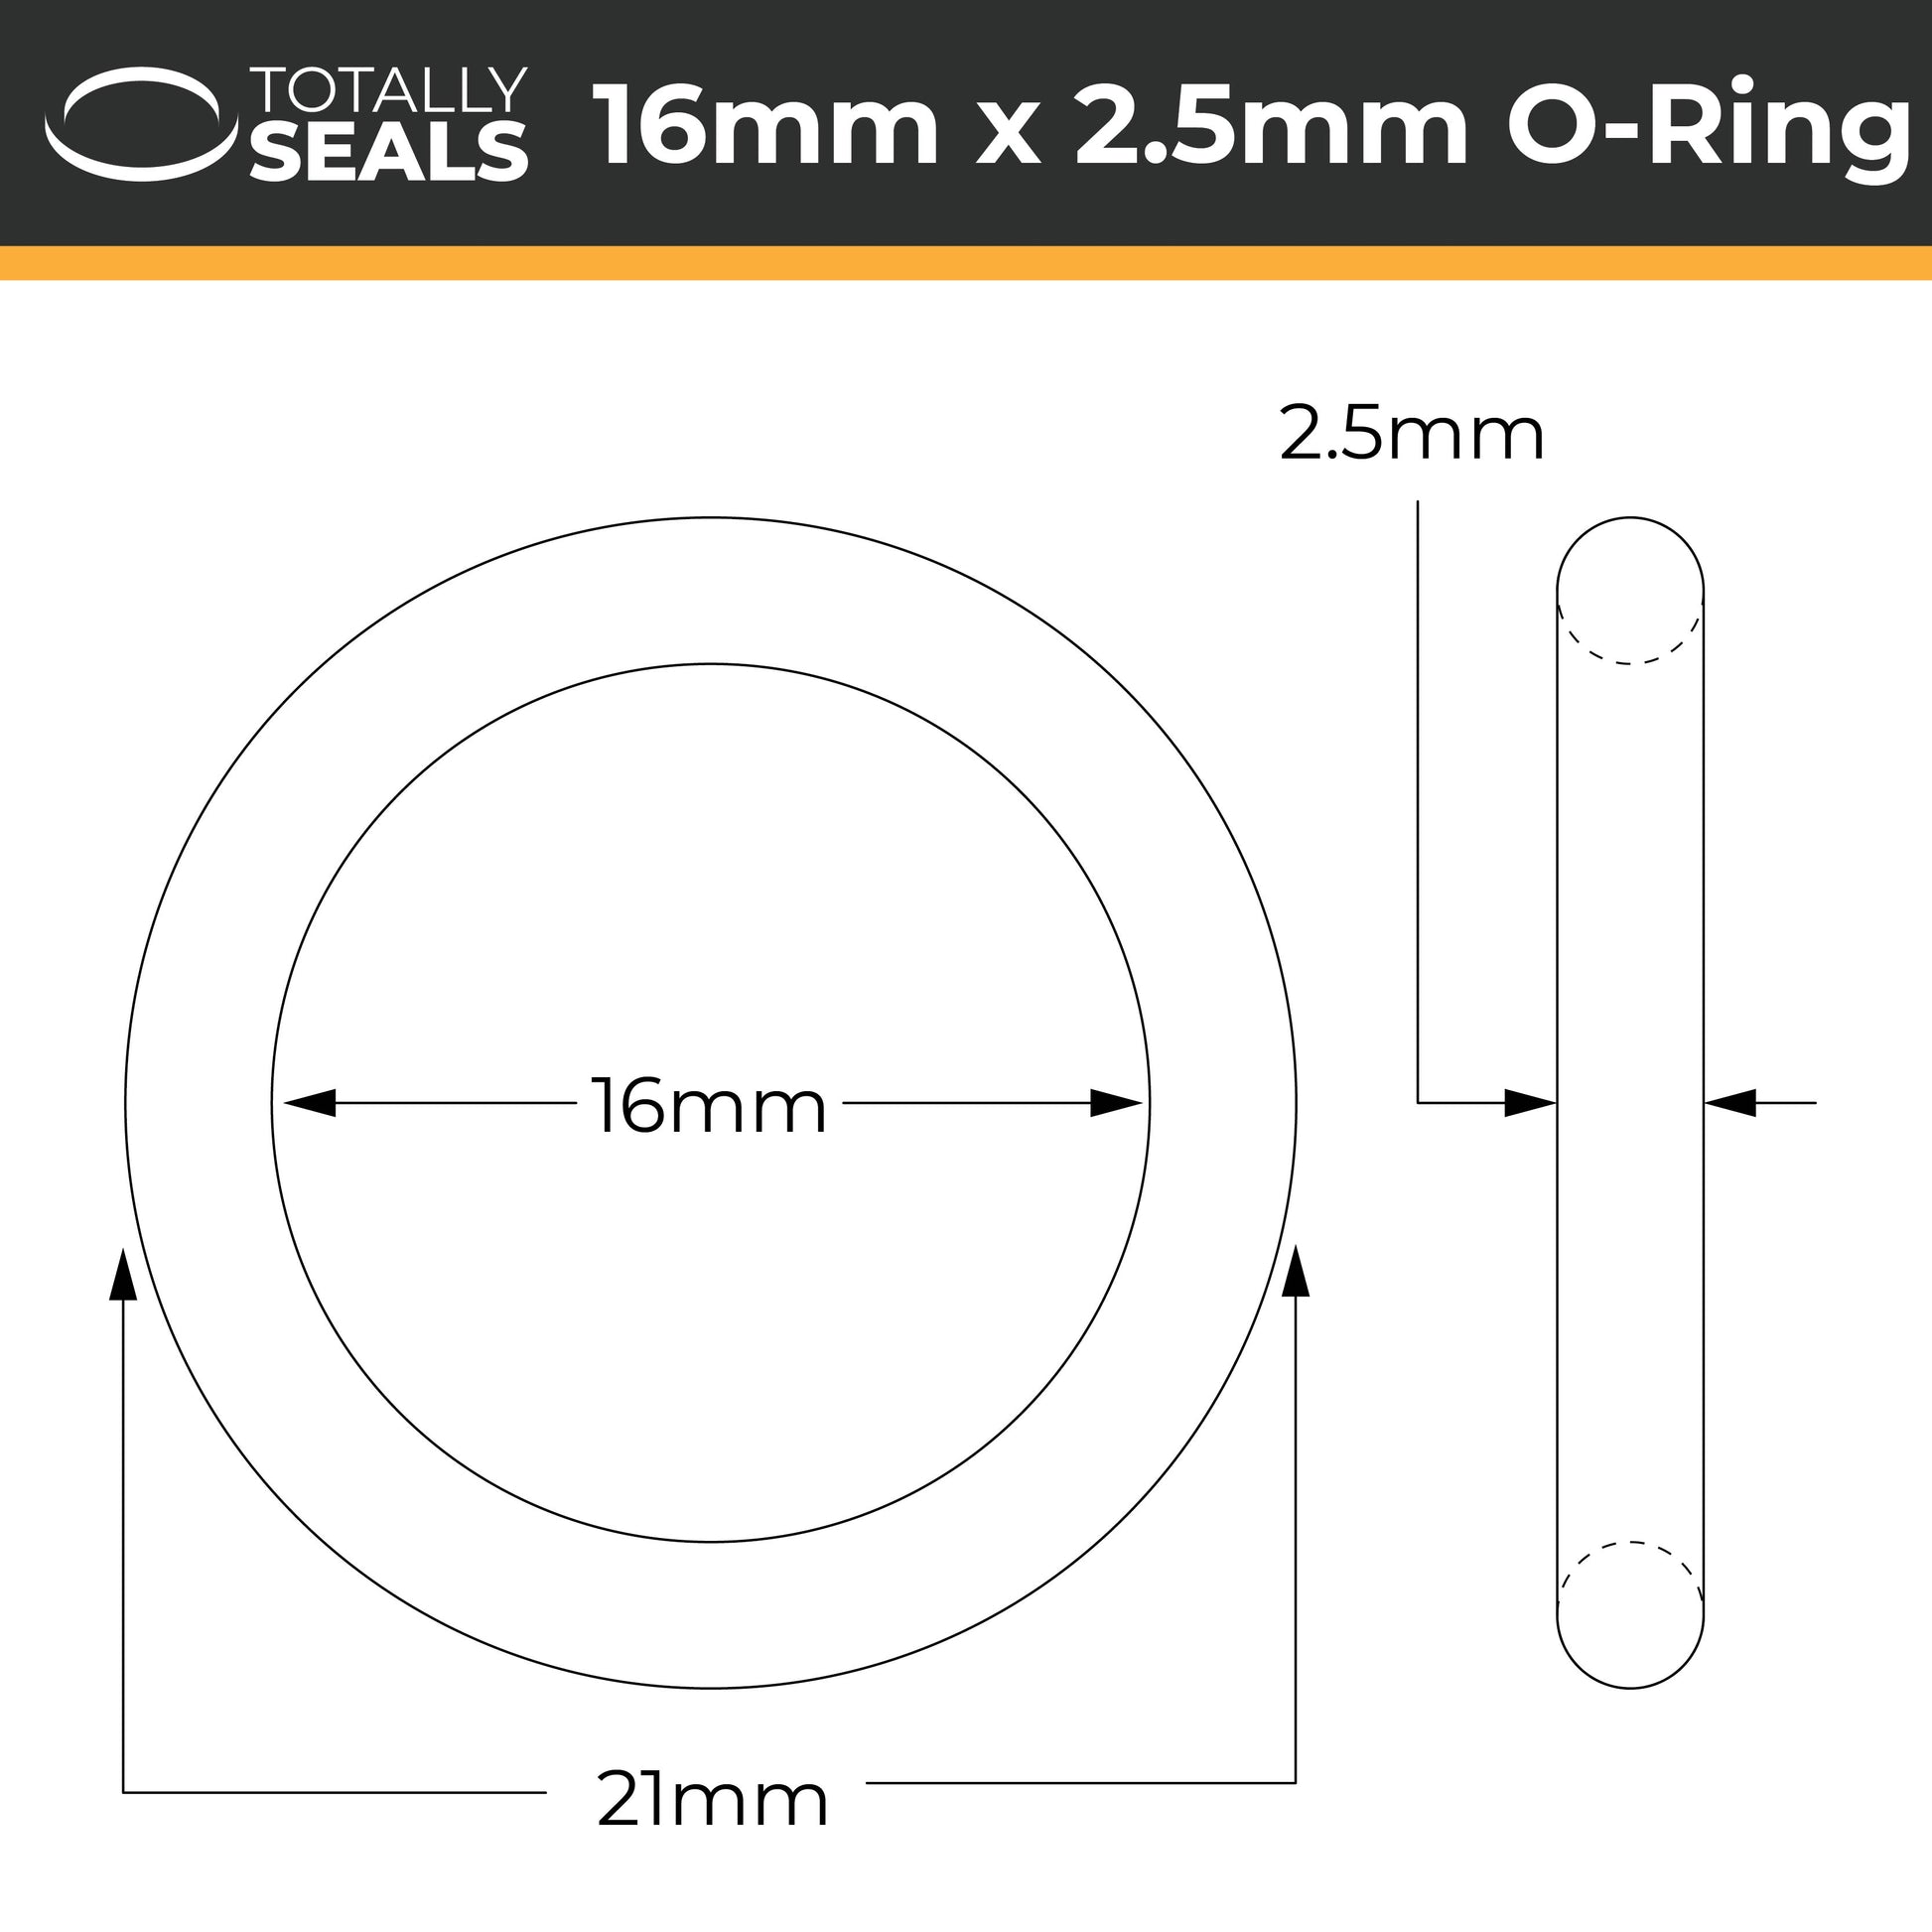 16mm x 2.5mm (21mm OD) Silicone O-Rings - Totally Seals®